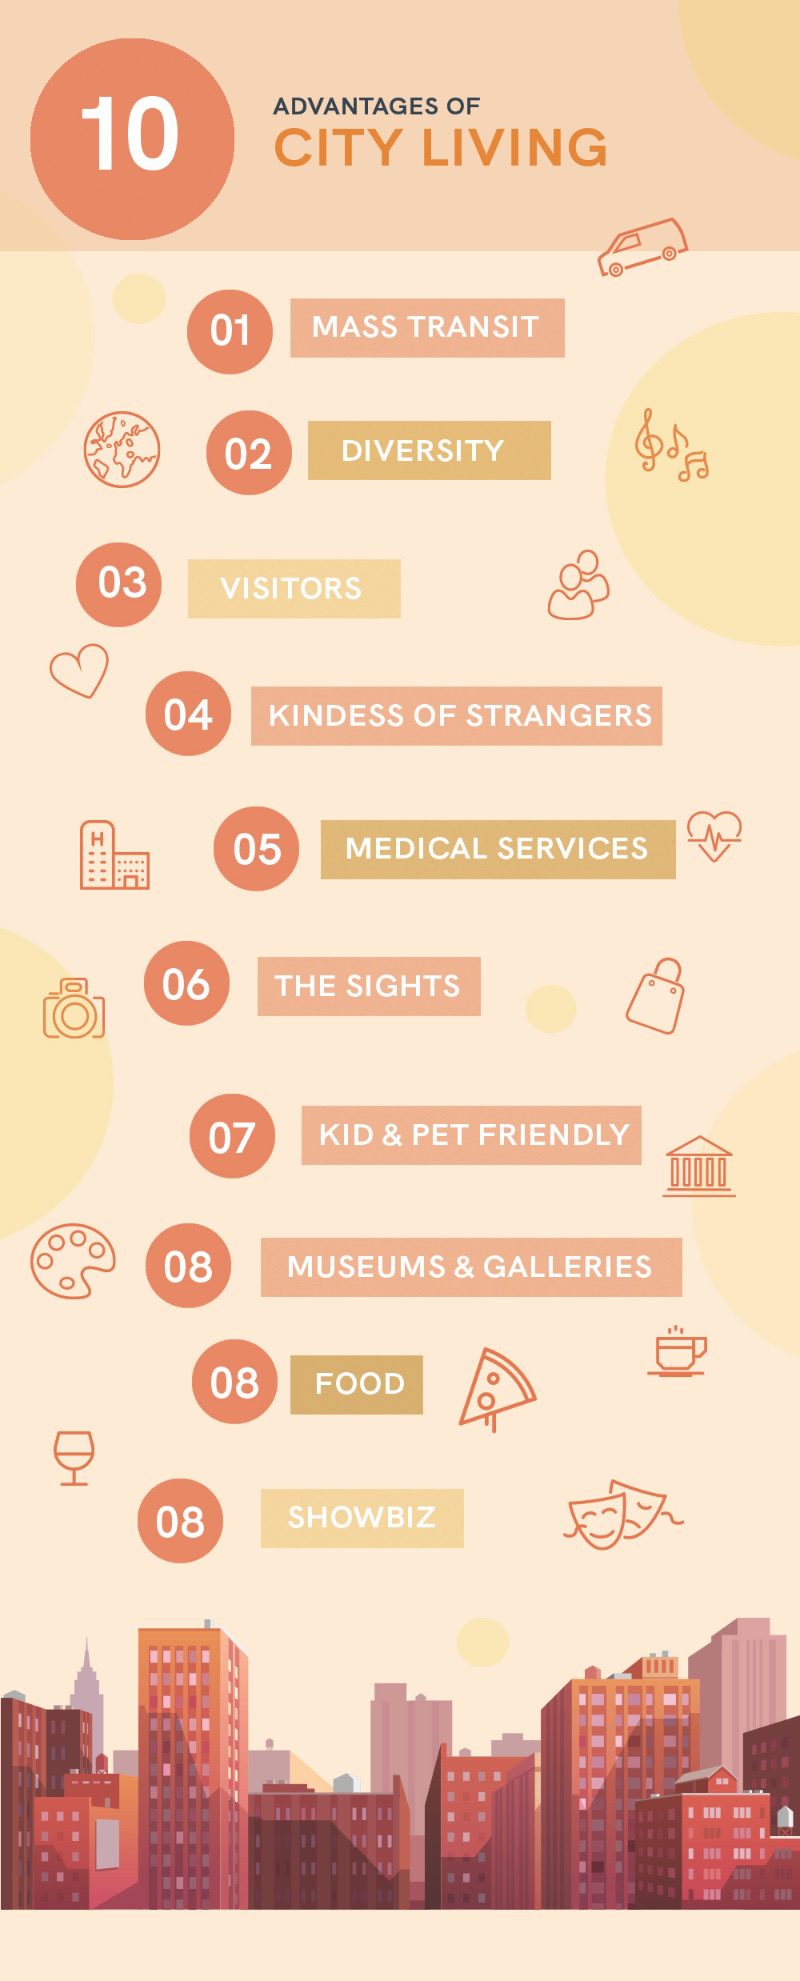 10 Advantages of City Living infographic